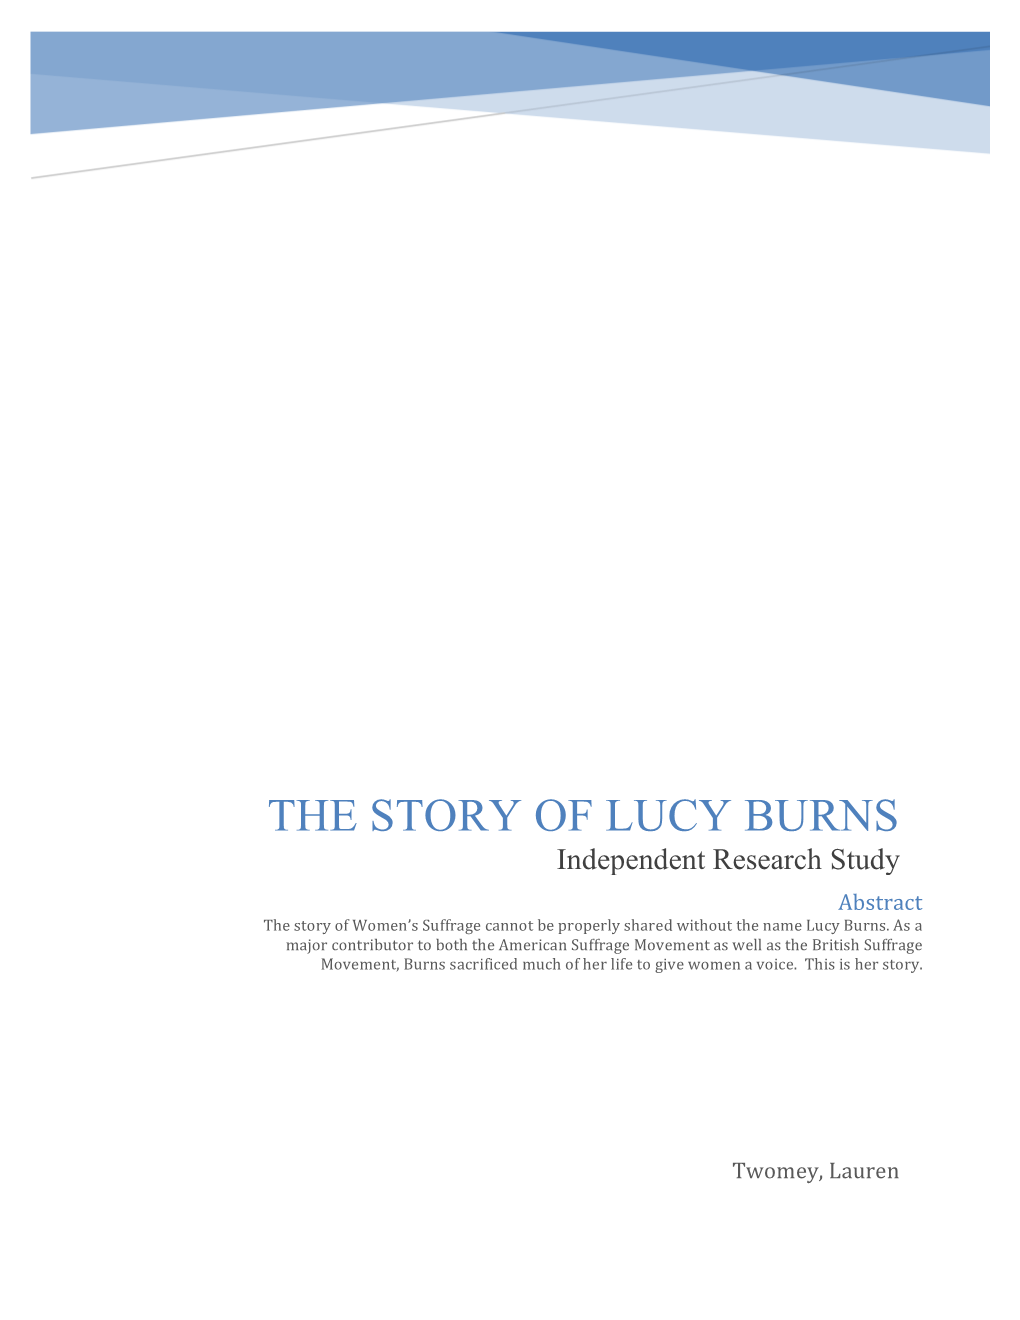 THE STORY of LUCY BURNS Independent Research Study Abstract the Story of Women’S Suffrage Cannot Be Properly Shared Without the Name Lucy Burns